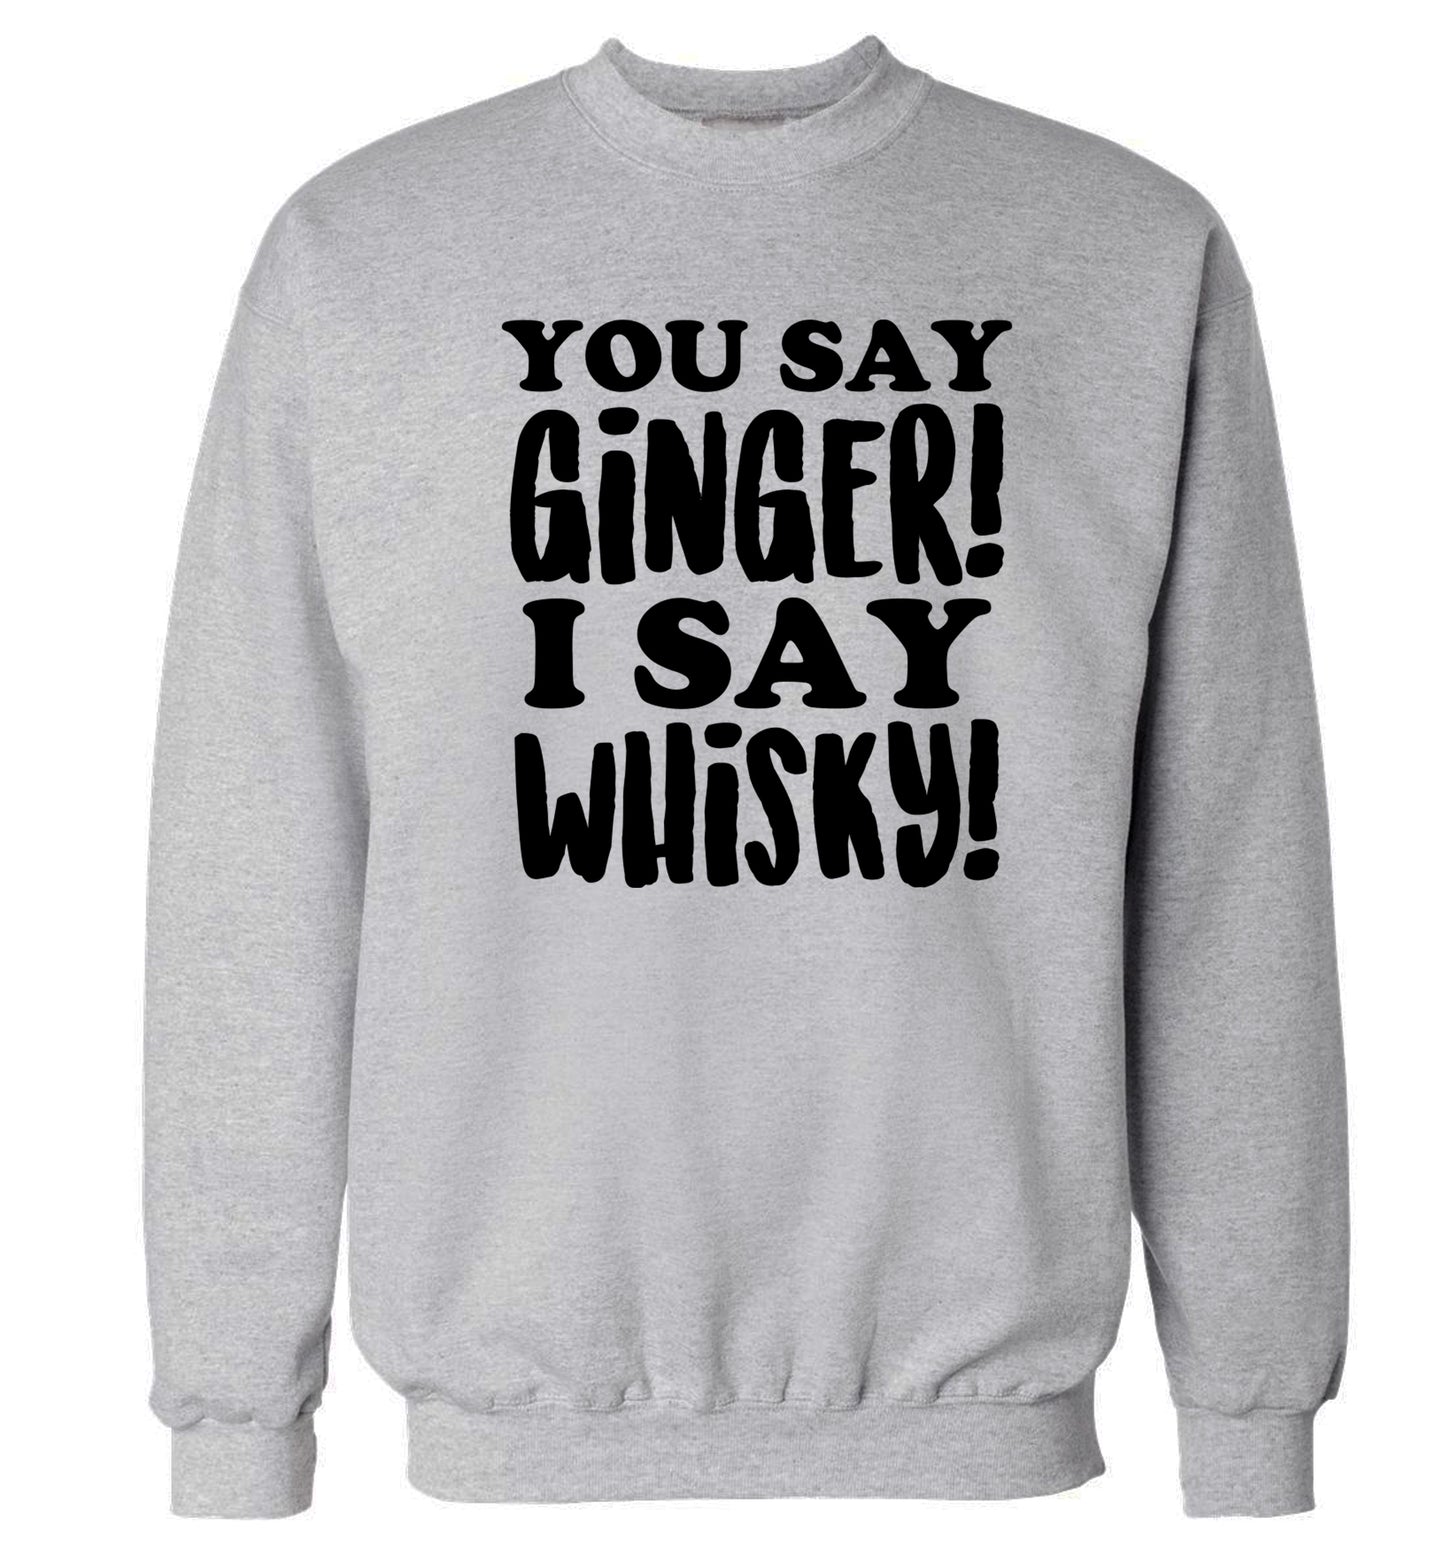 You say ginger I say whisky! Adult's unisex grey Sweater 2XL